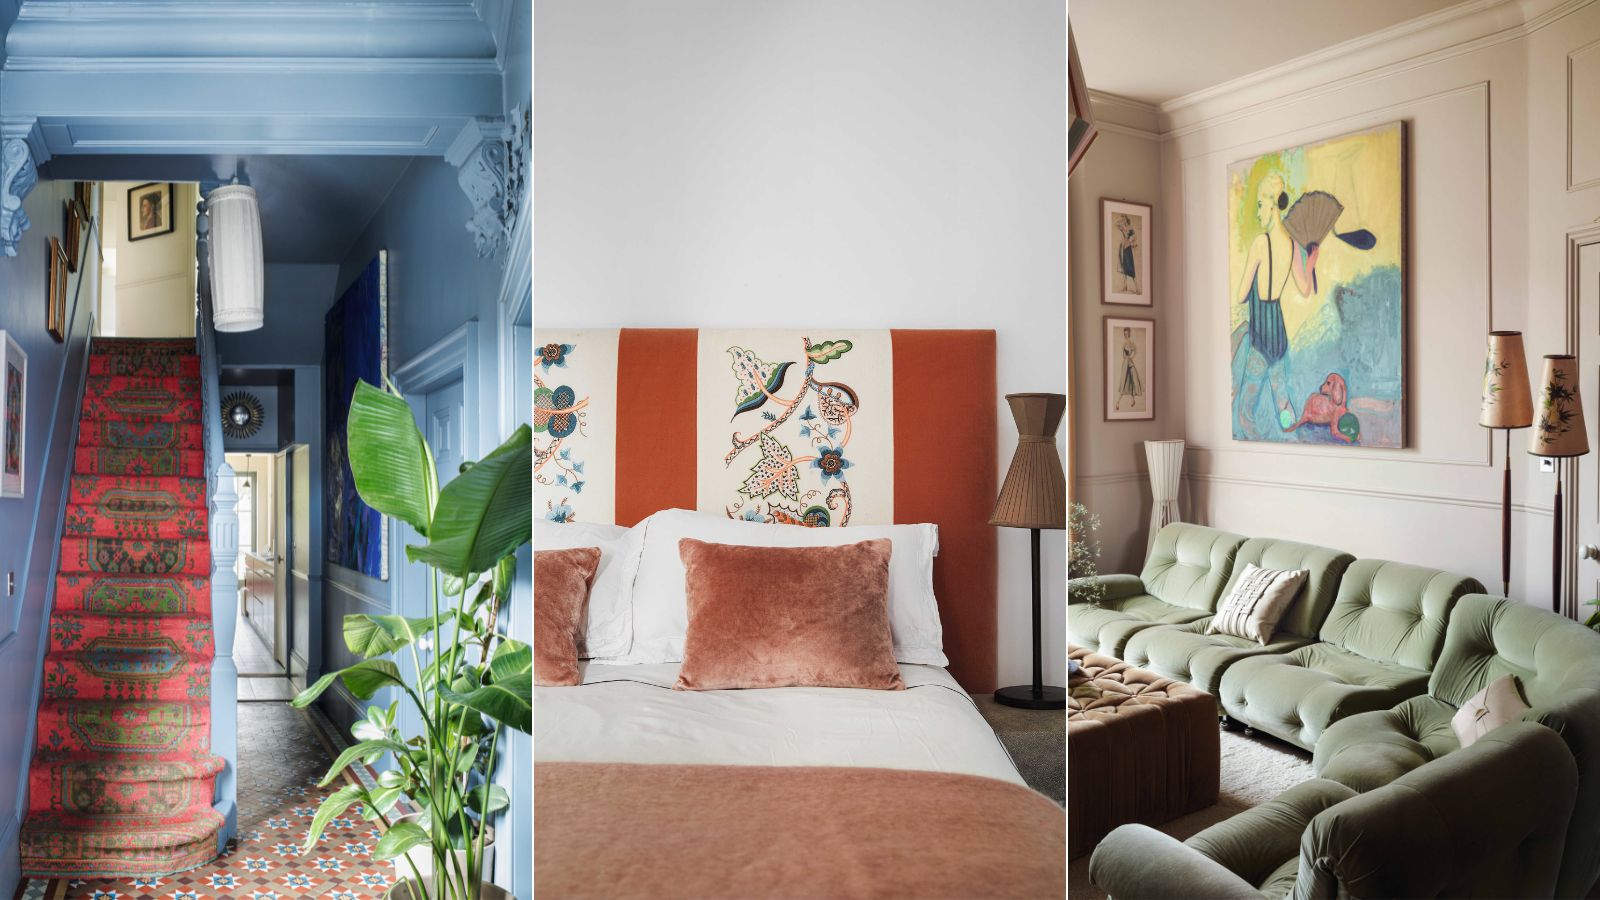 A Mood Board Masterclass for Architects and Interior Designers - Eclectic  Trends